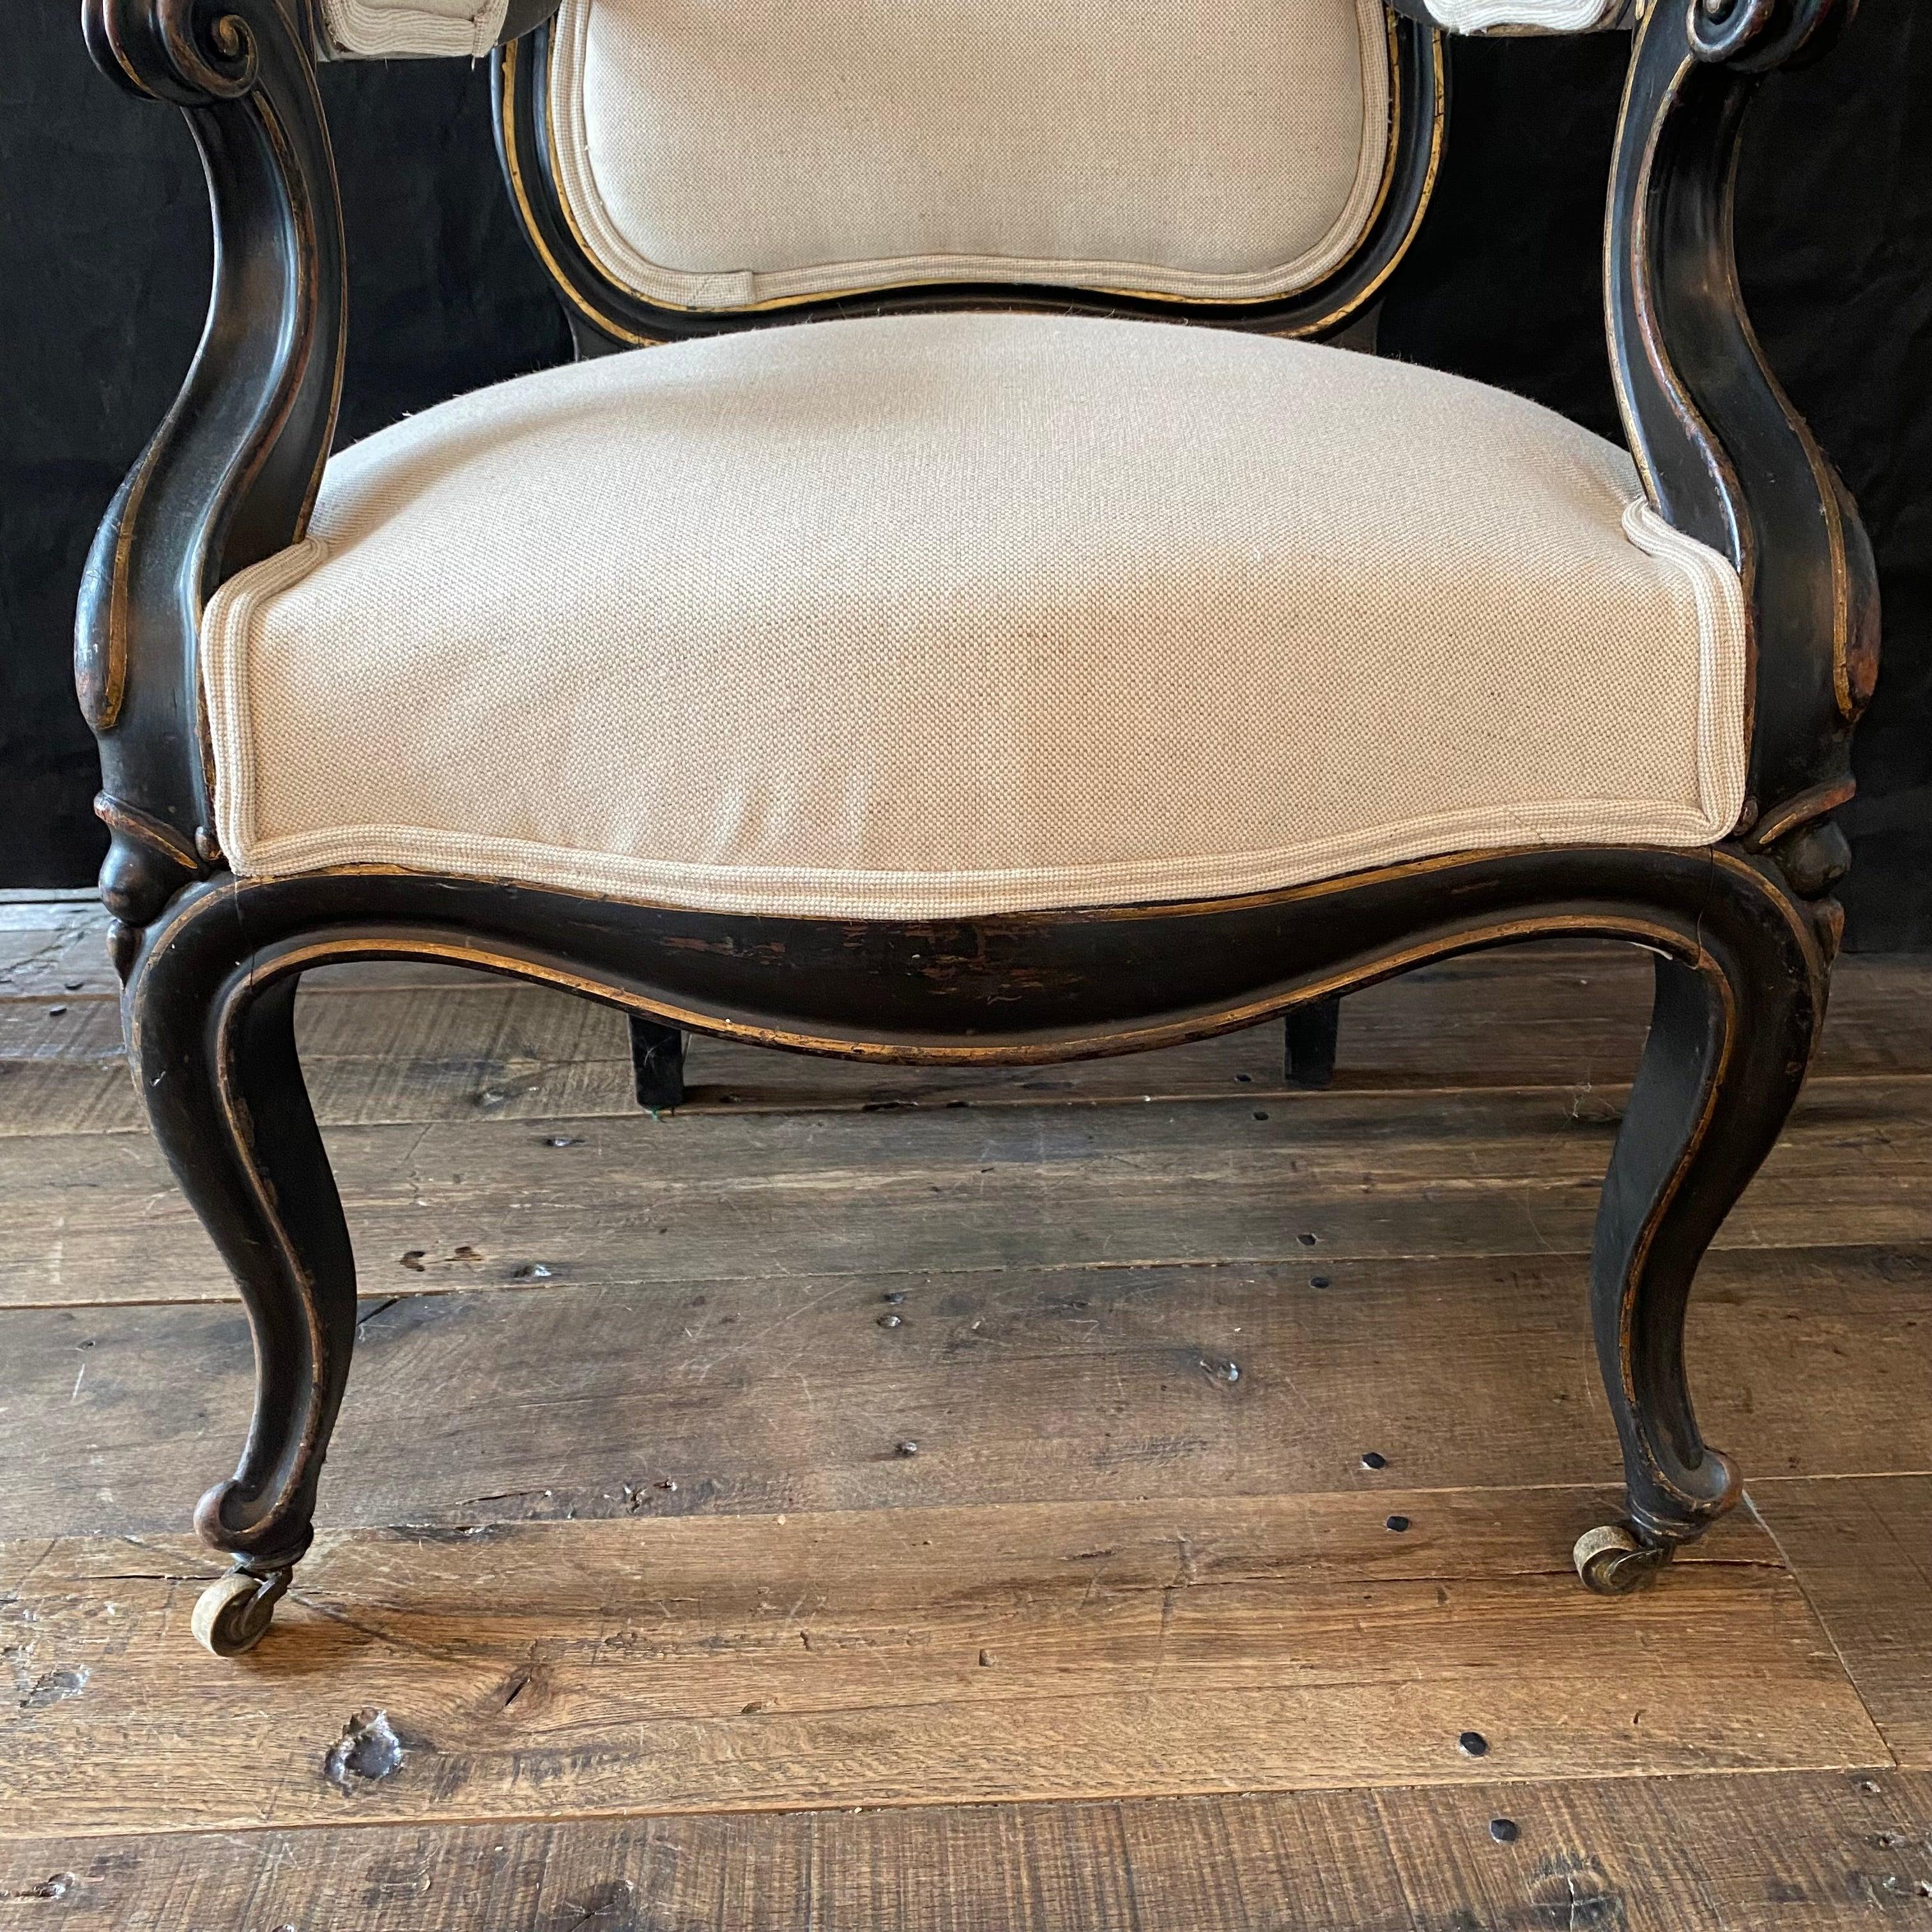 Pair of graceful Napoleon III ebonized salon arm chairs with balloon back, cabriole legs, and new upholstery. France, circa 1870. Beautifully restored frames with original ebonized wood. Wonderful as dining chairs or in a living room.
Arm height